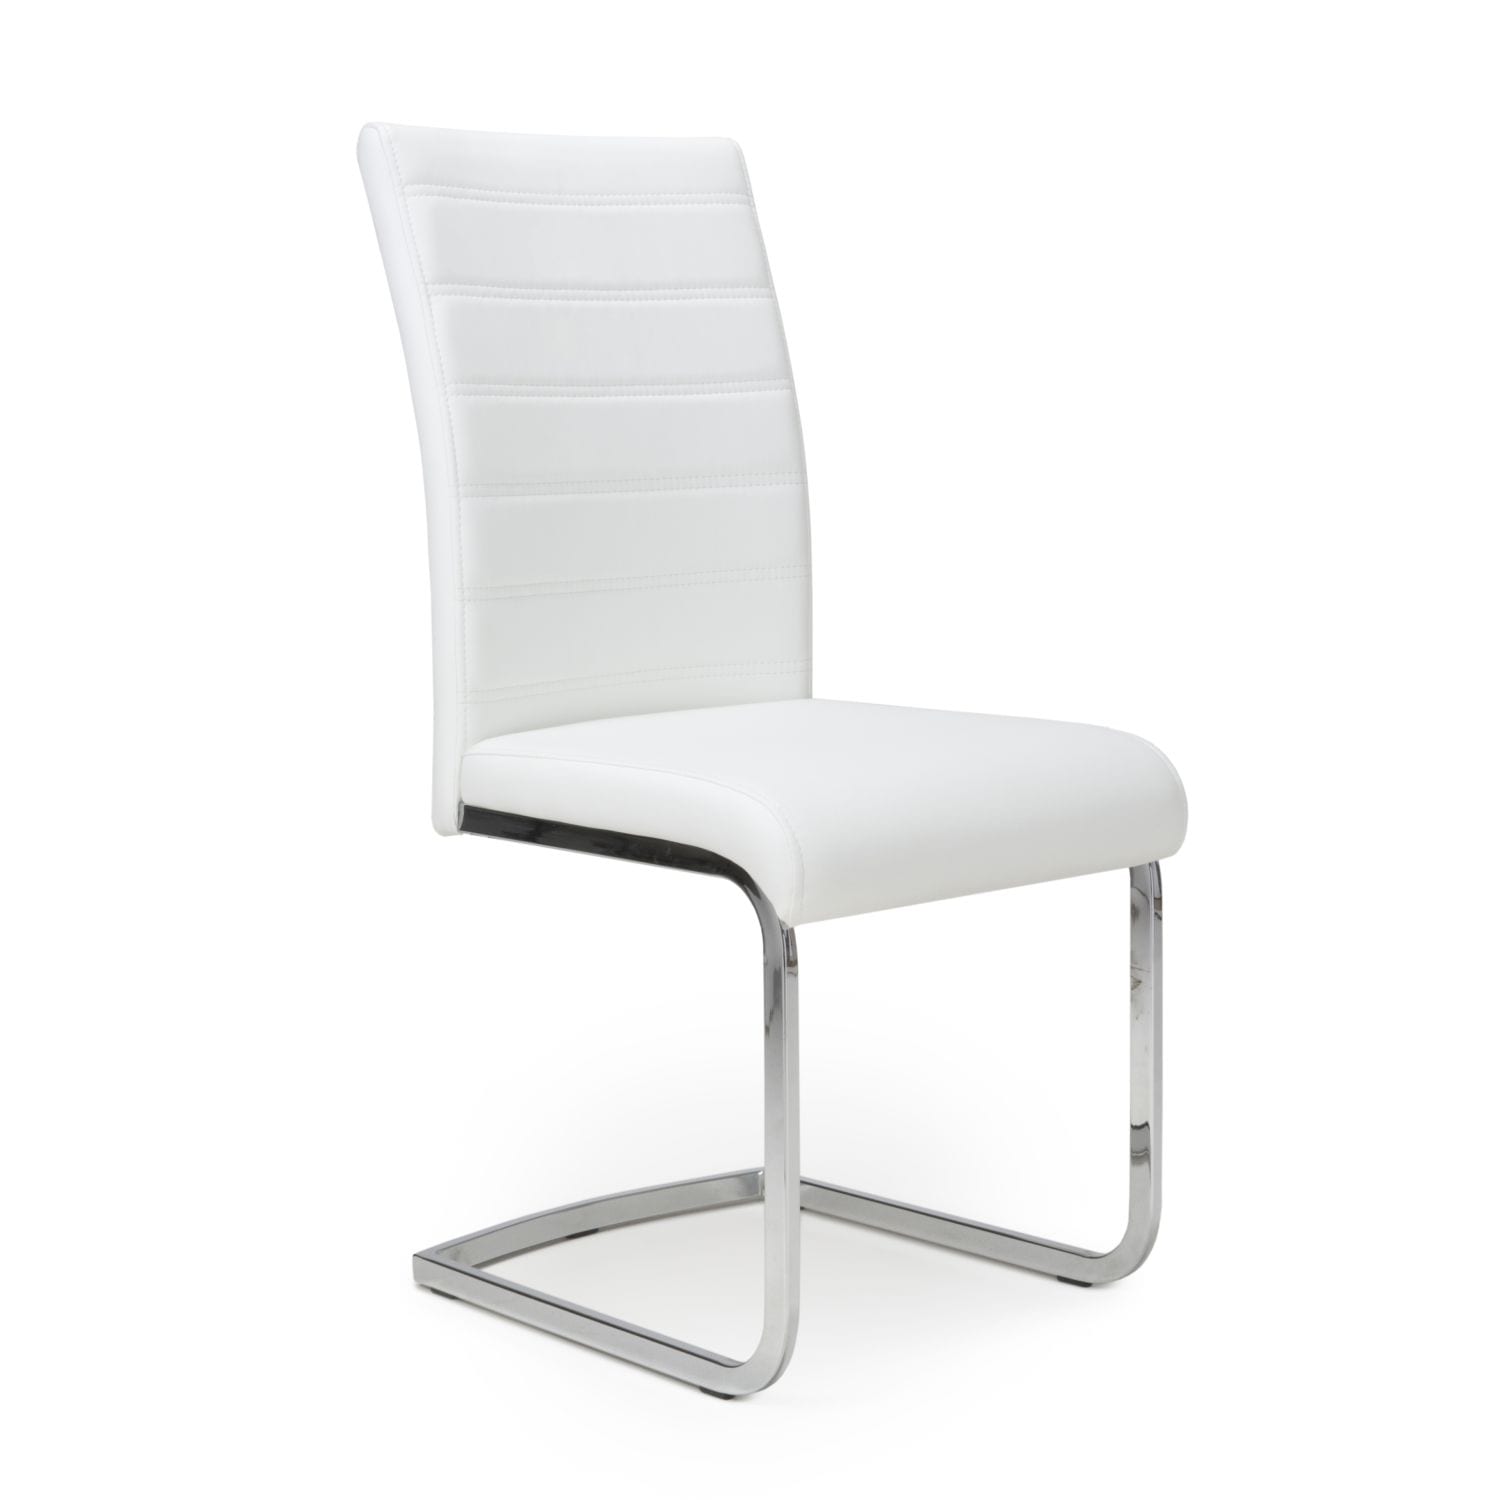 Kally Leather Effect White Chair